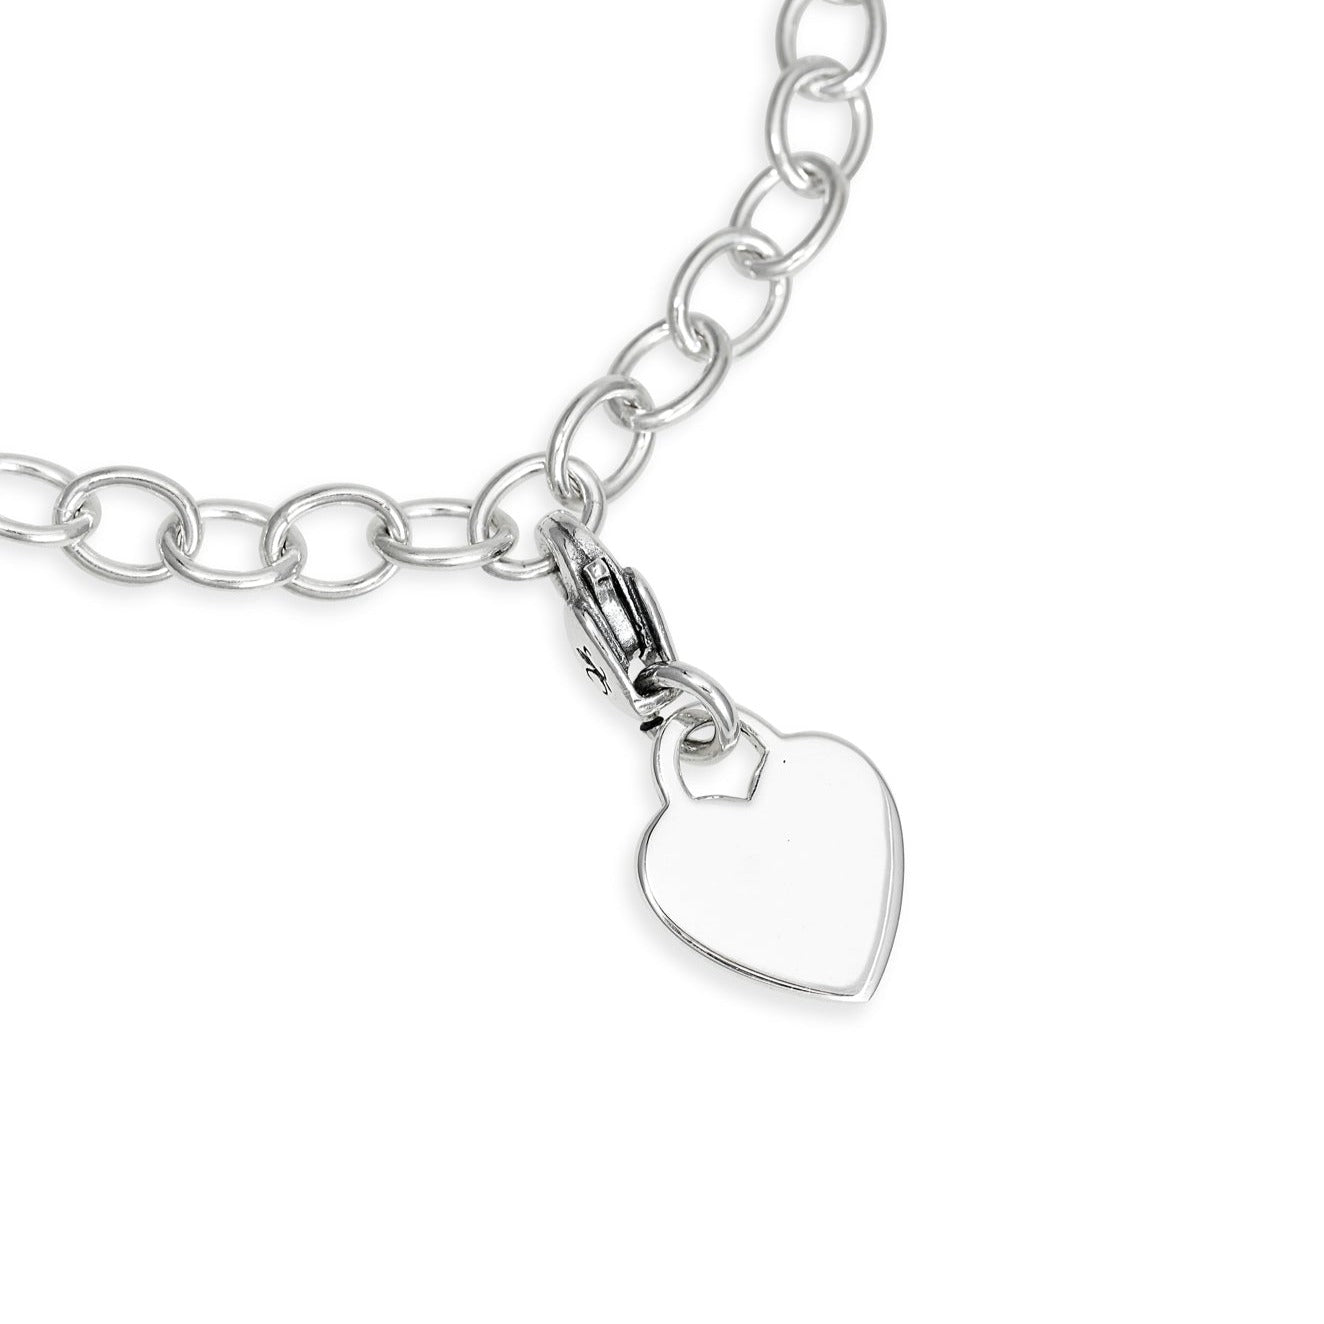 Express Your Love Heart Clip Charm